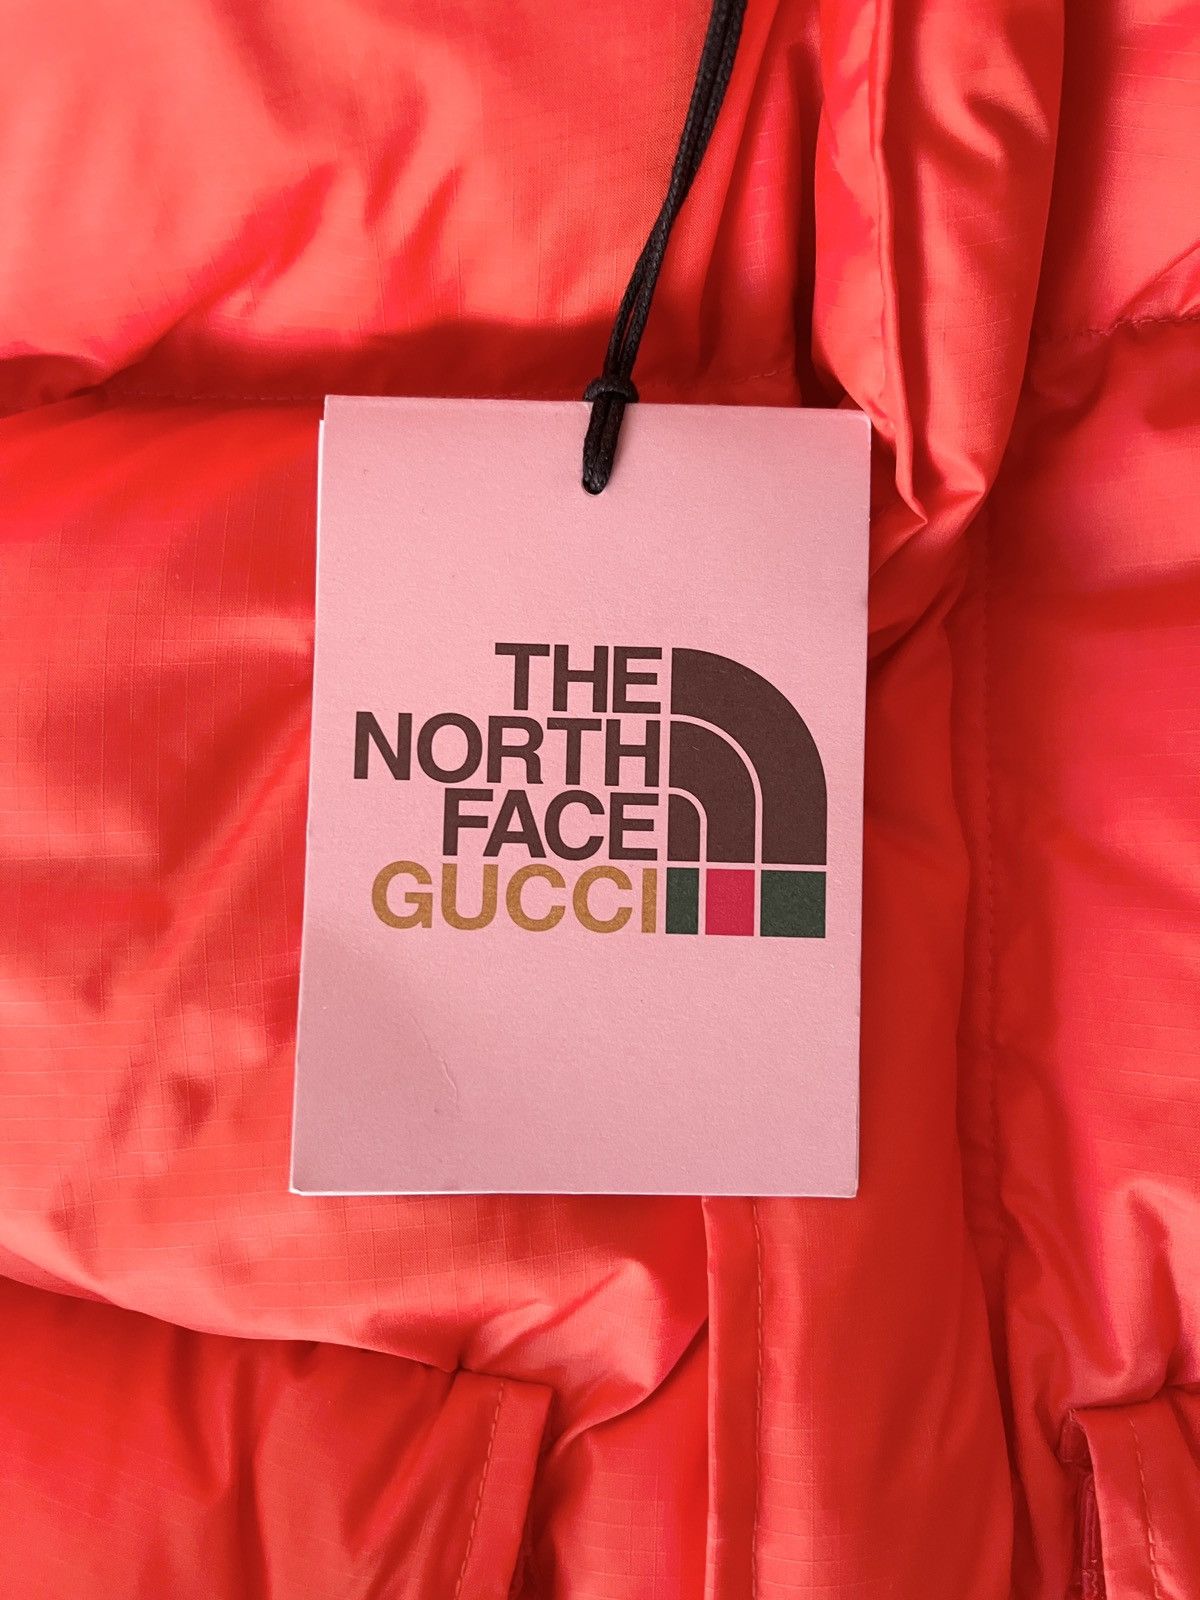 GRAIL! 2021 Gucci x The North Face Puffer Jacket in Large - 11